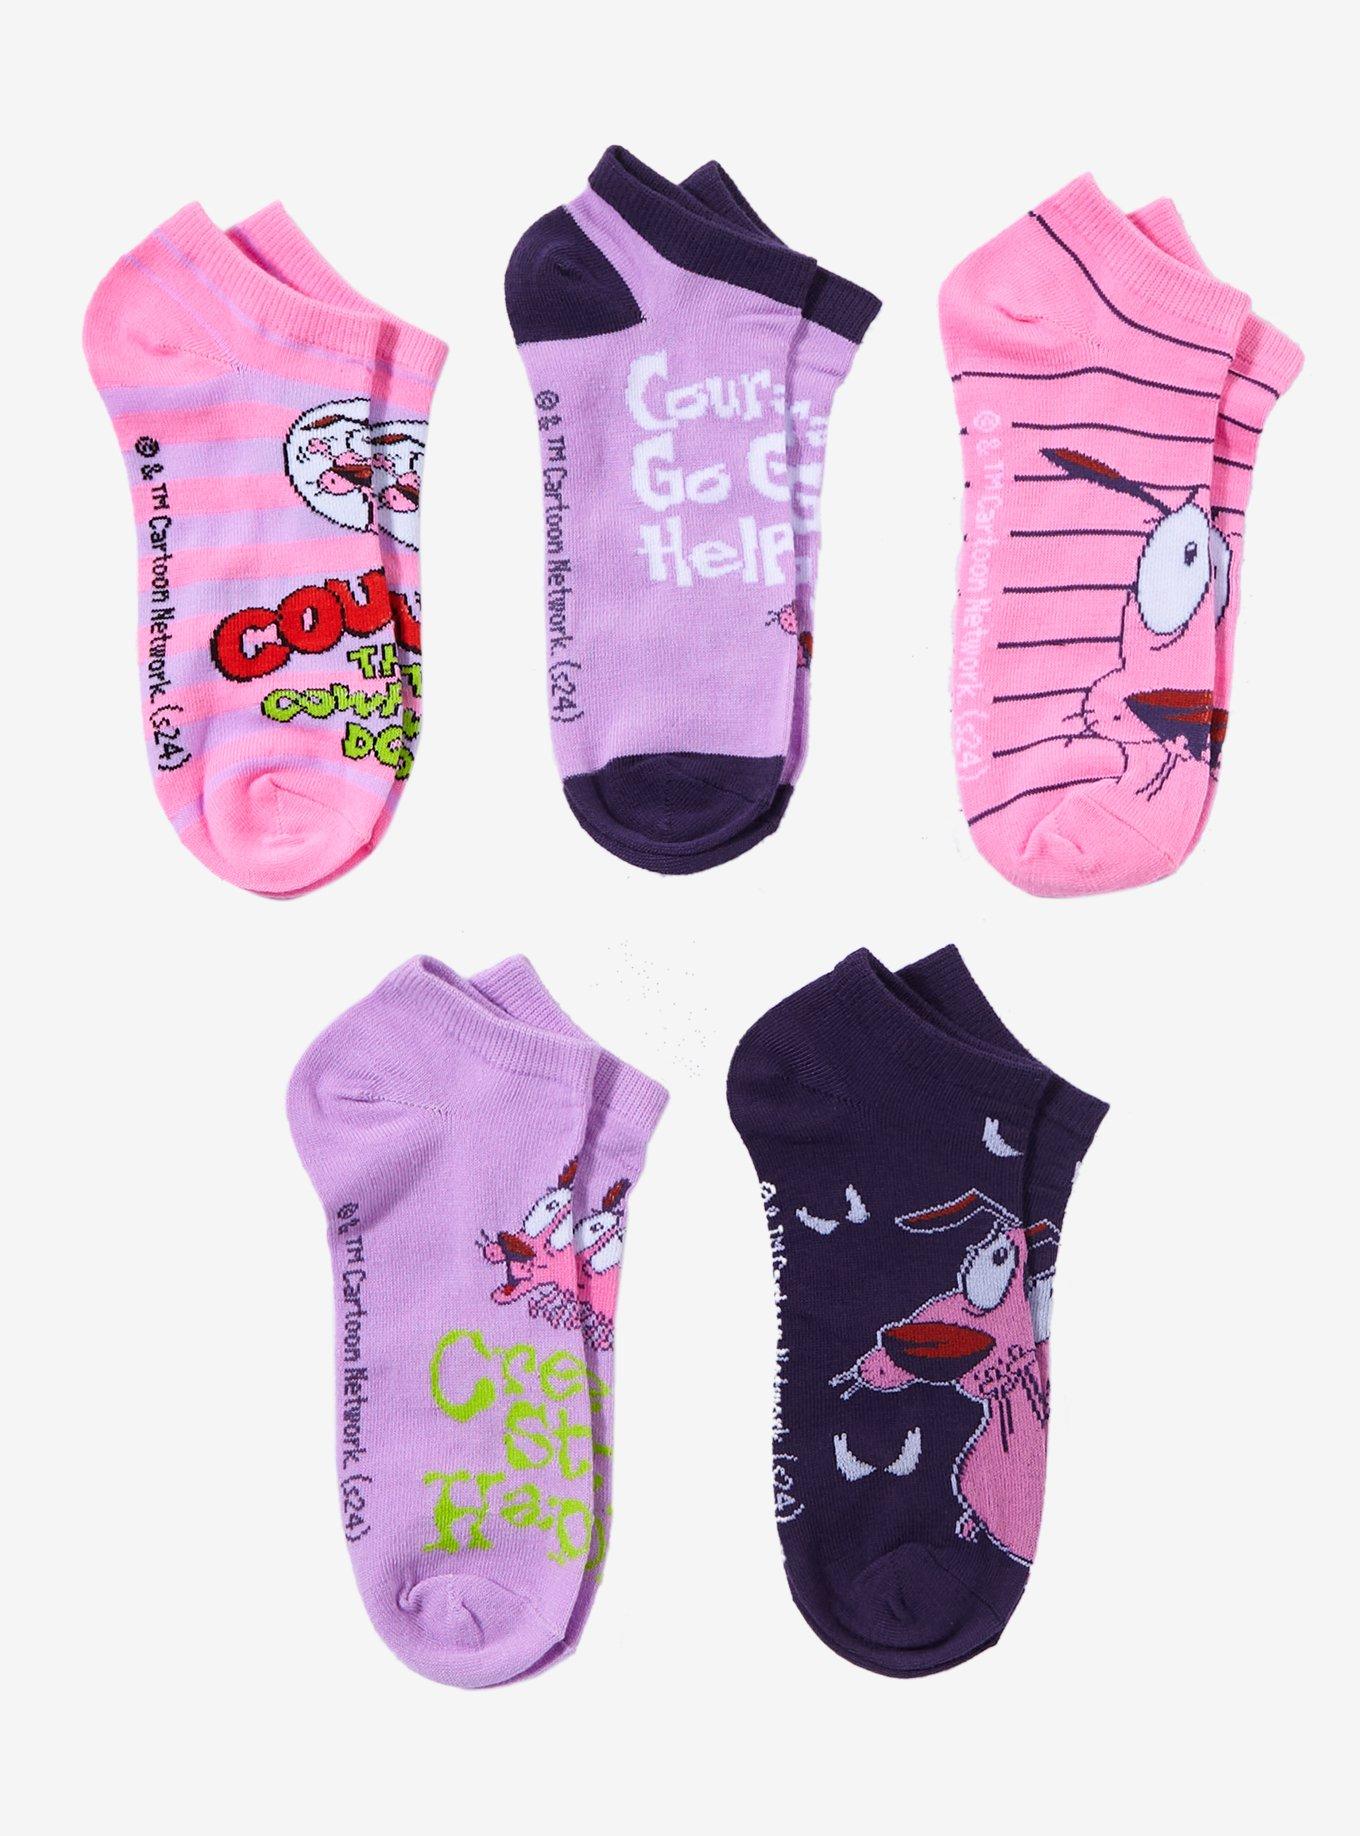 Courage The Cowardly Dog No-Show Socks 5 Pair